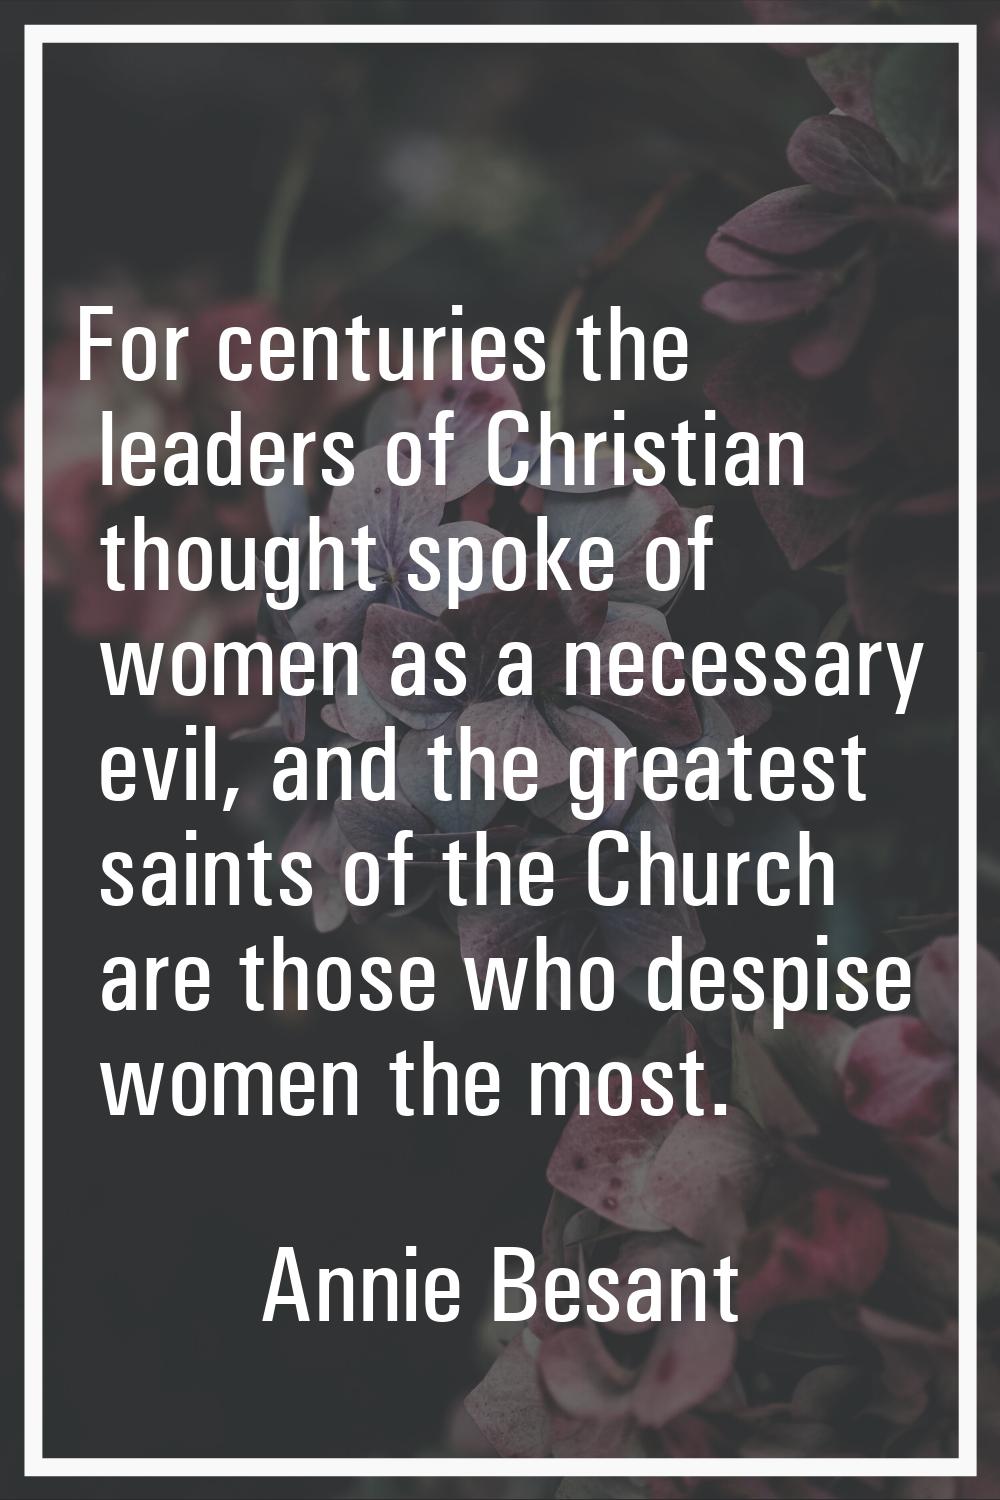 For centuries the leaders of Christian thought spoke of women as a necessary evil, and the greatest